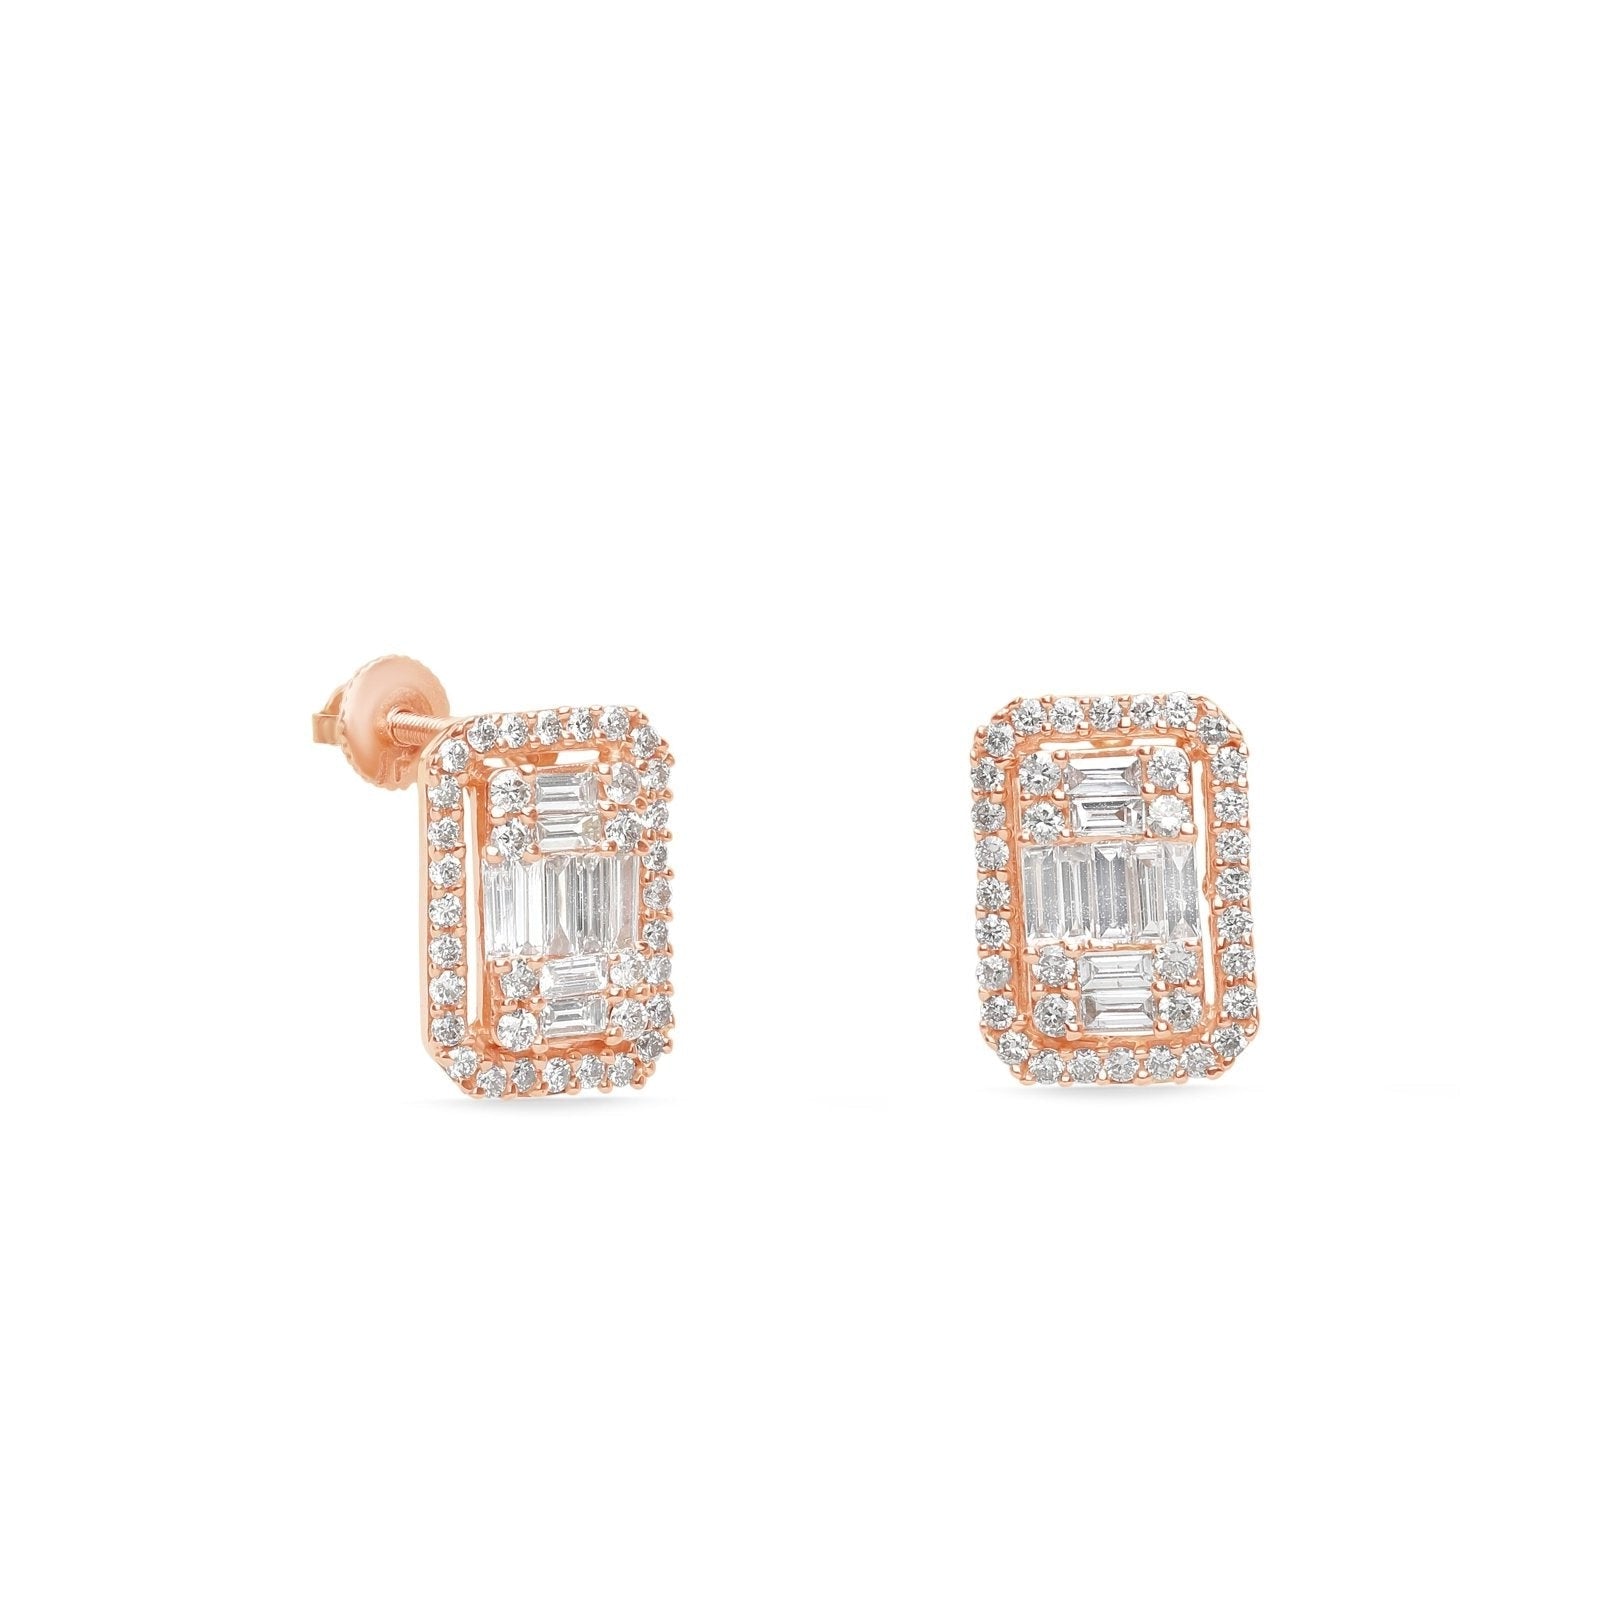 Luxurious Mixed Diamond 14k Gold Vintage Style Halo Studs Earrings Estella Collection #product_description# 14k Birthstone Birthstone Earrings #tag4# #tag5# #tag6# #tag7# #tag8# #tag9# #tag10#